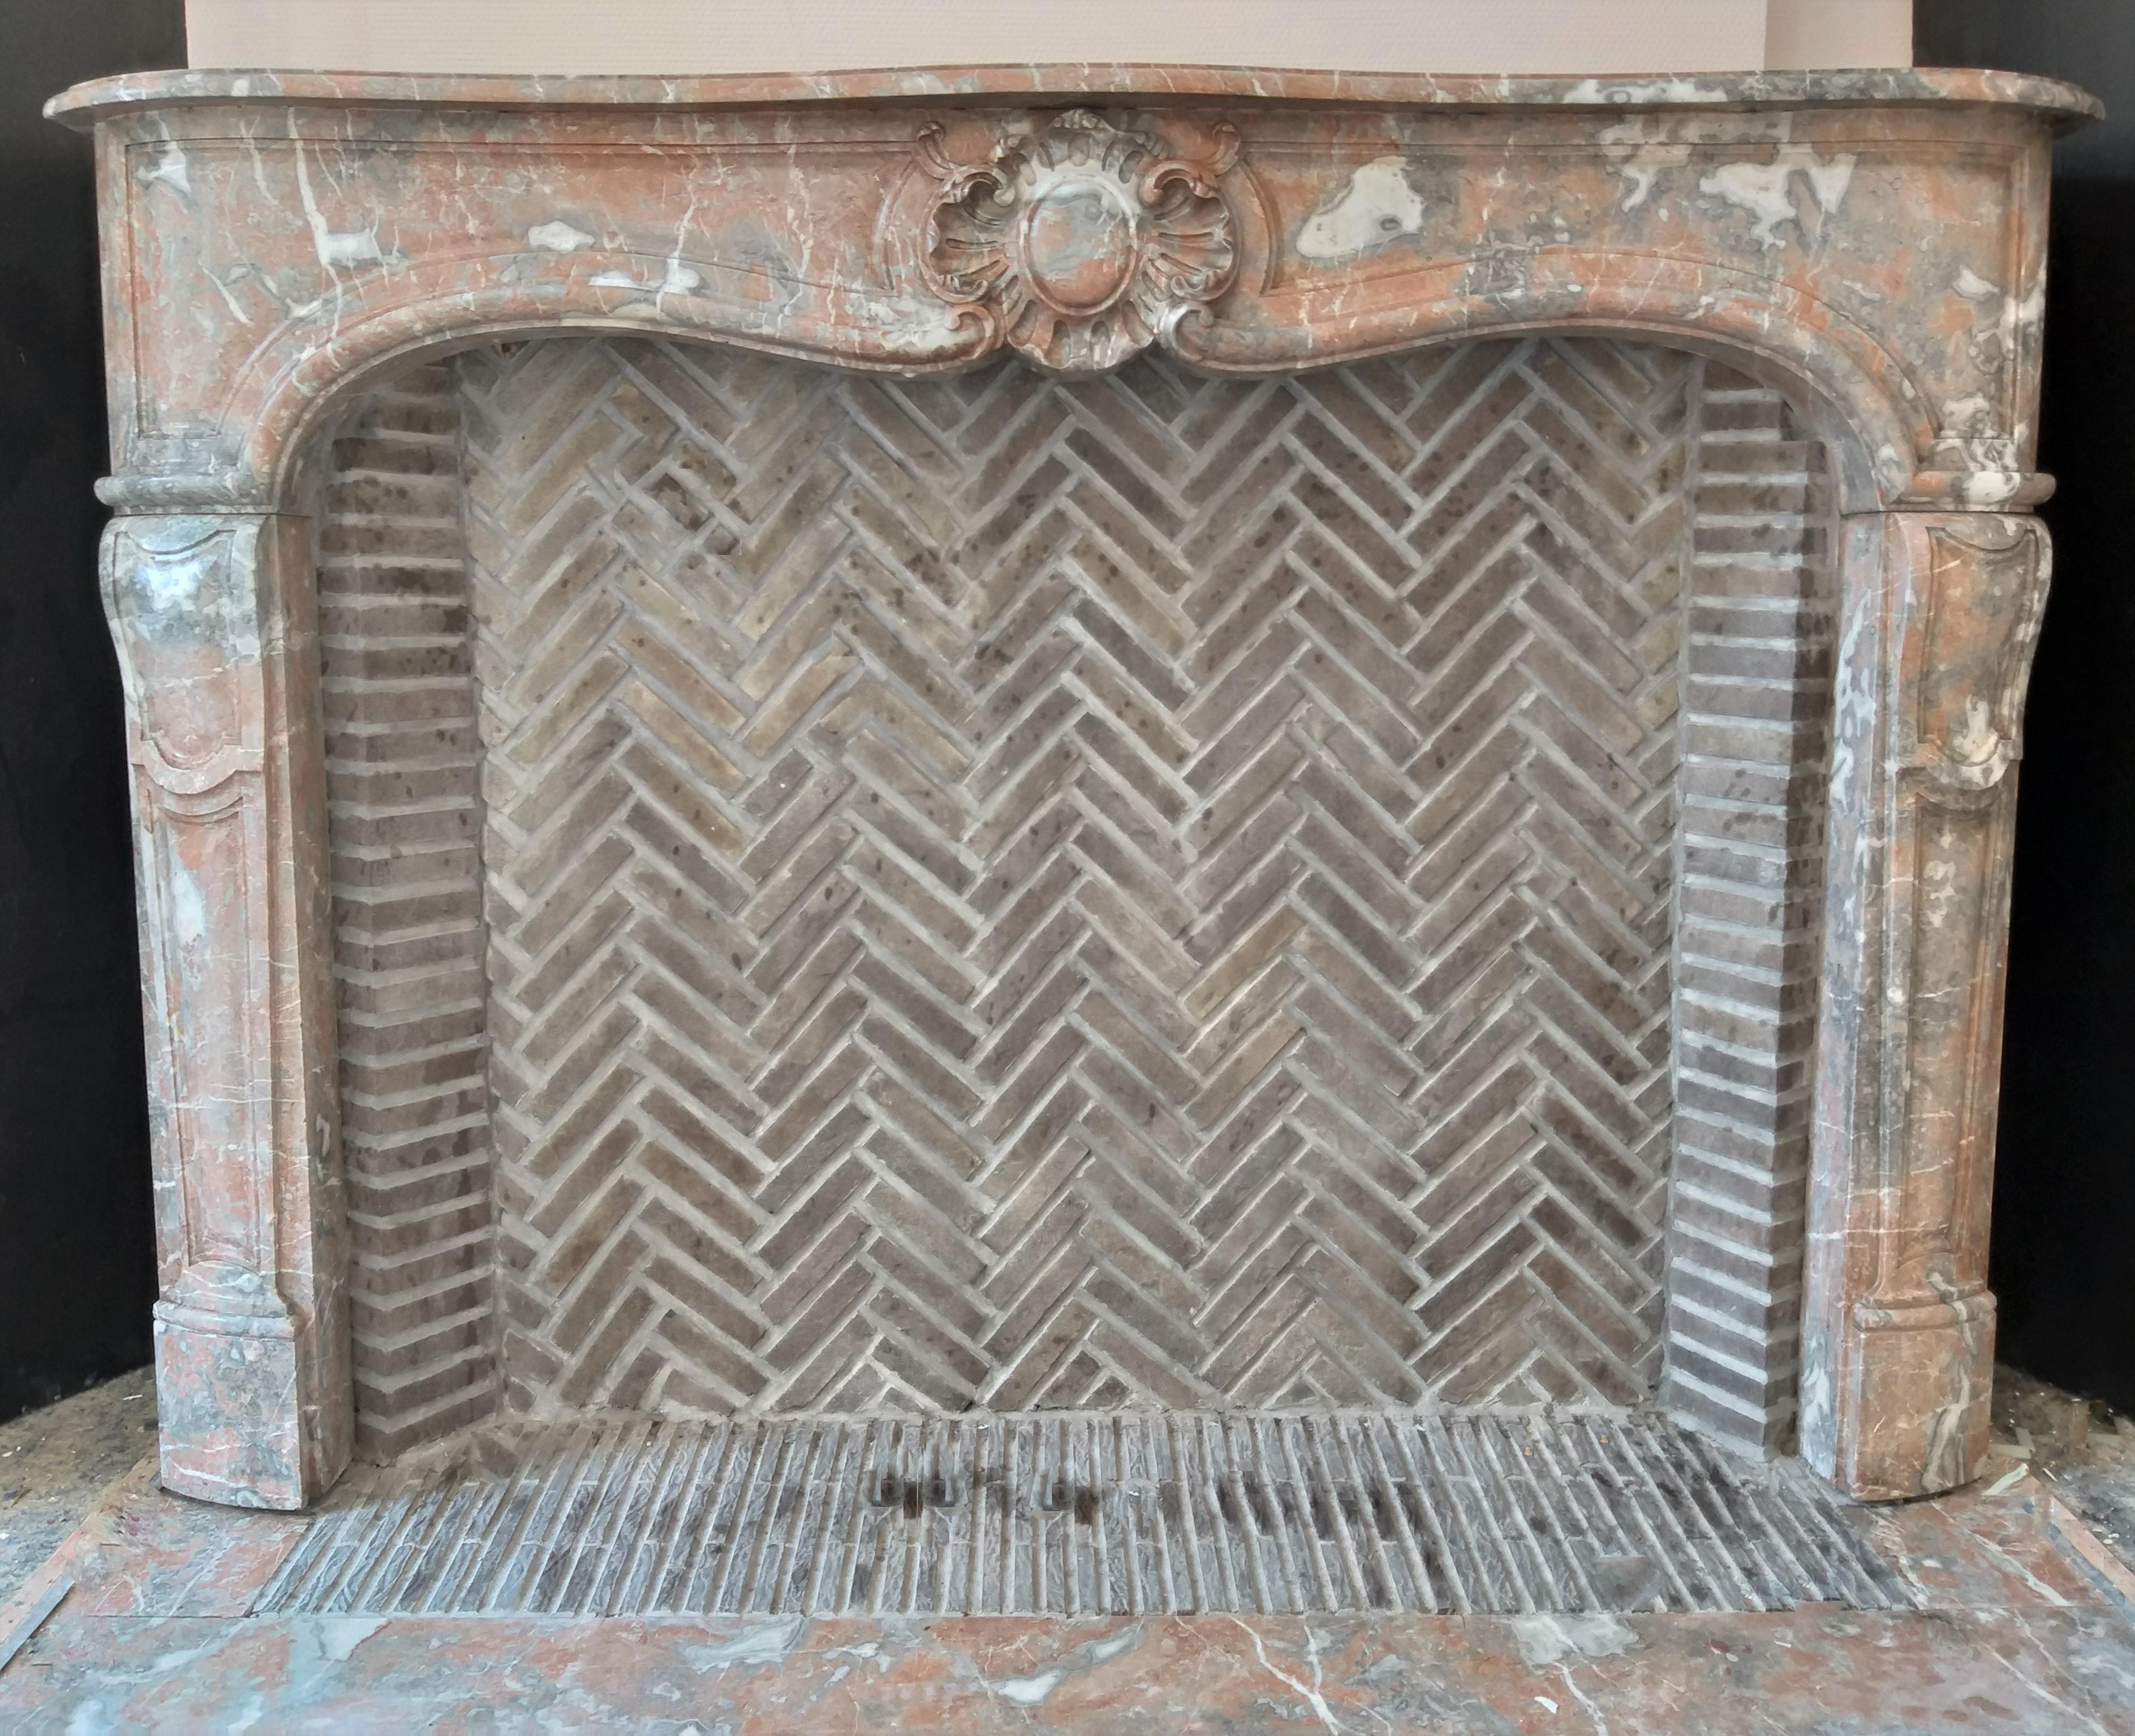 This charming, antique Louis XV-style fireplace was made out of the most beloved Belgian red marble: Saint Rémy, during the 19th century.
The colors of Saint Rémy are soft-toned red, grey and white veins. The center of the slightly curved frieze is